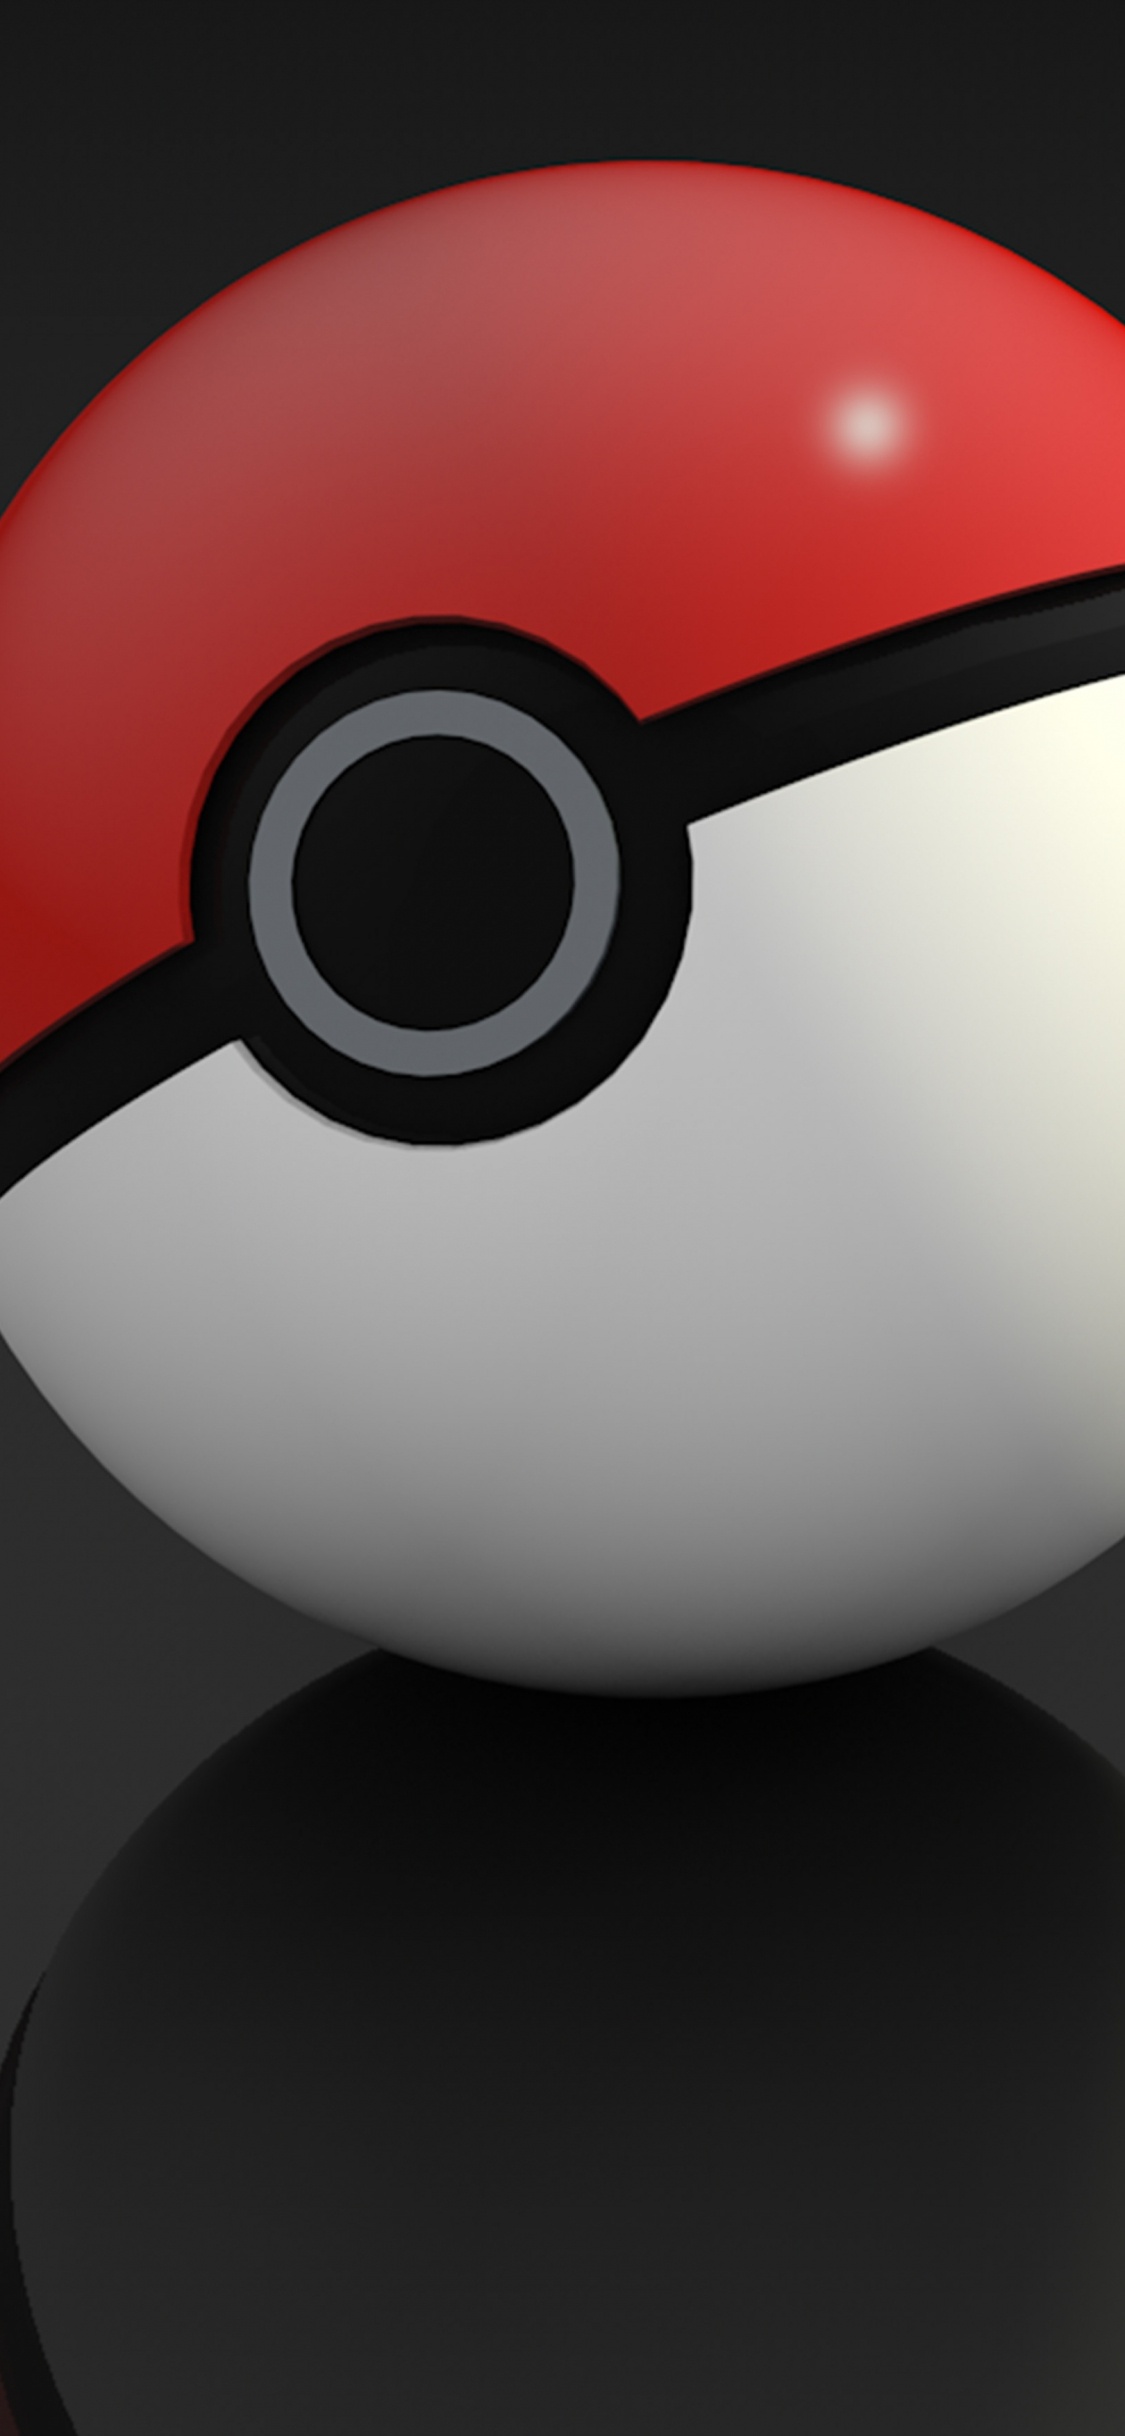 Pok Ball, Ball, Animation, Auge, Games. Wallpaper in 1125x2436 Resolution